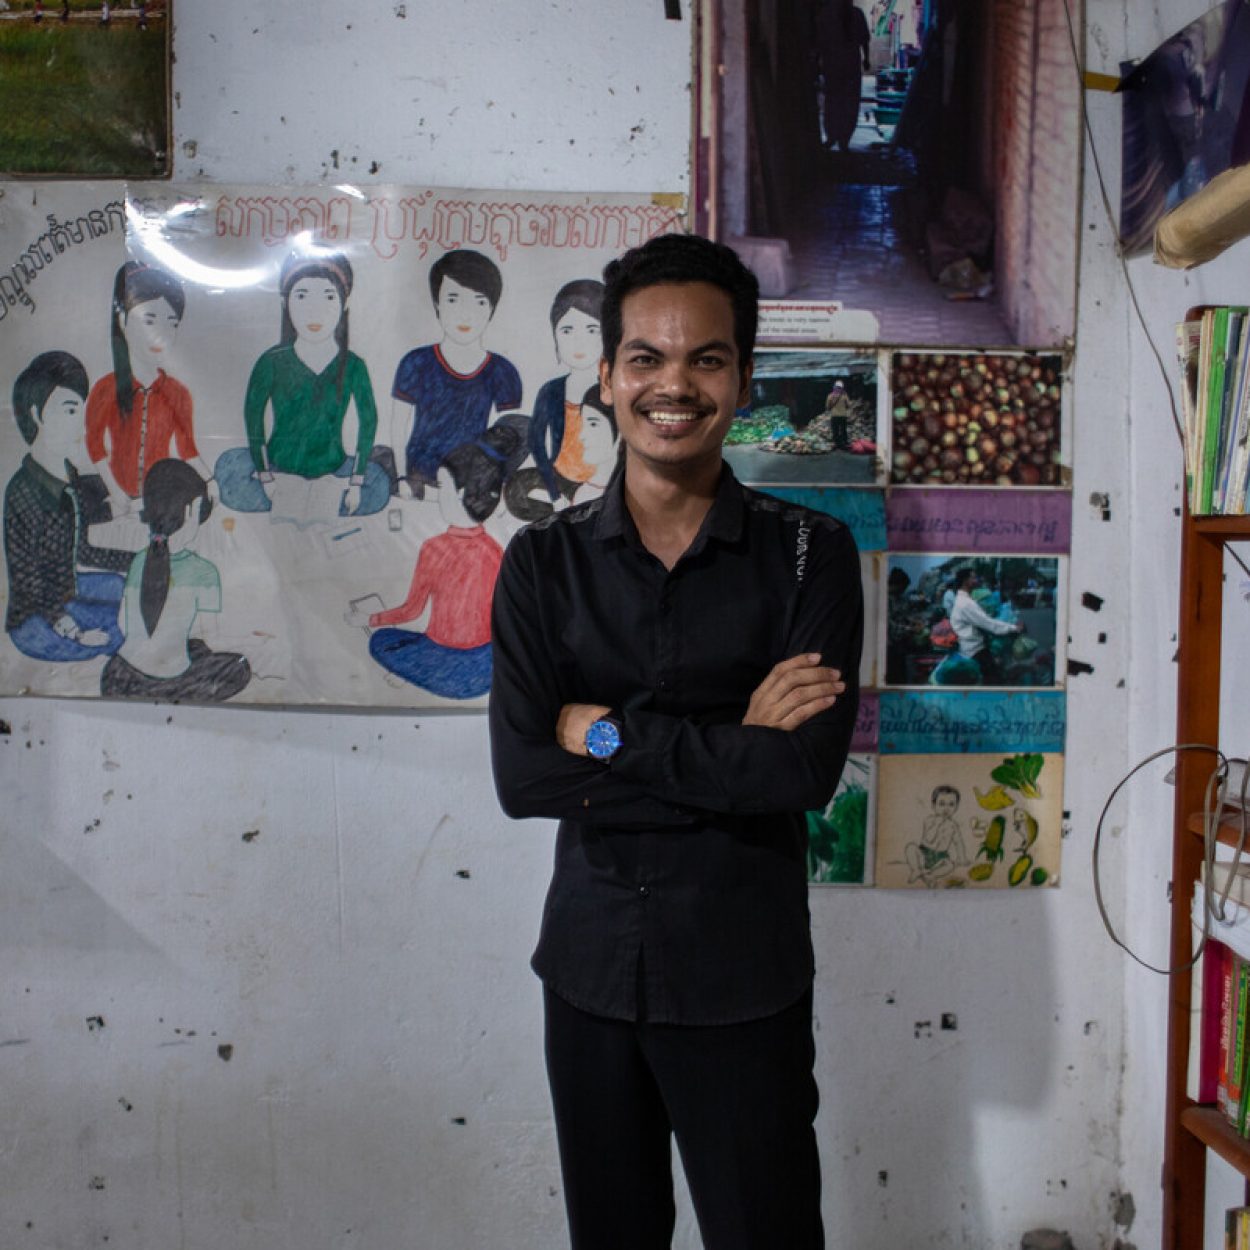 Chorn Phorn, a key organiser at WIC, is posing for the camera during a visit to one of WIC's drop-in centres in Phom Penh. He smiling and standing in front of a poster he created for one of WIC's campaigns.